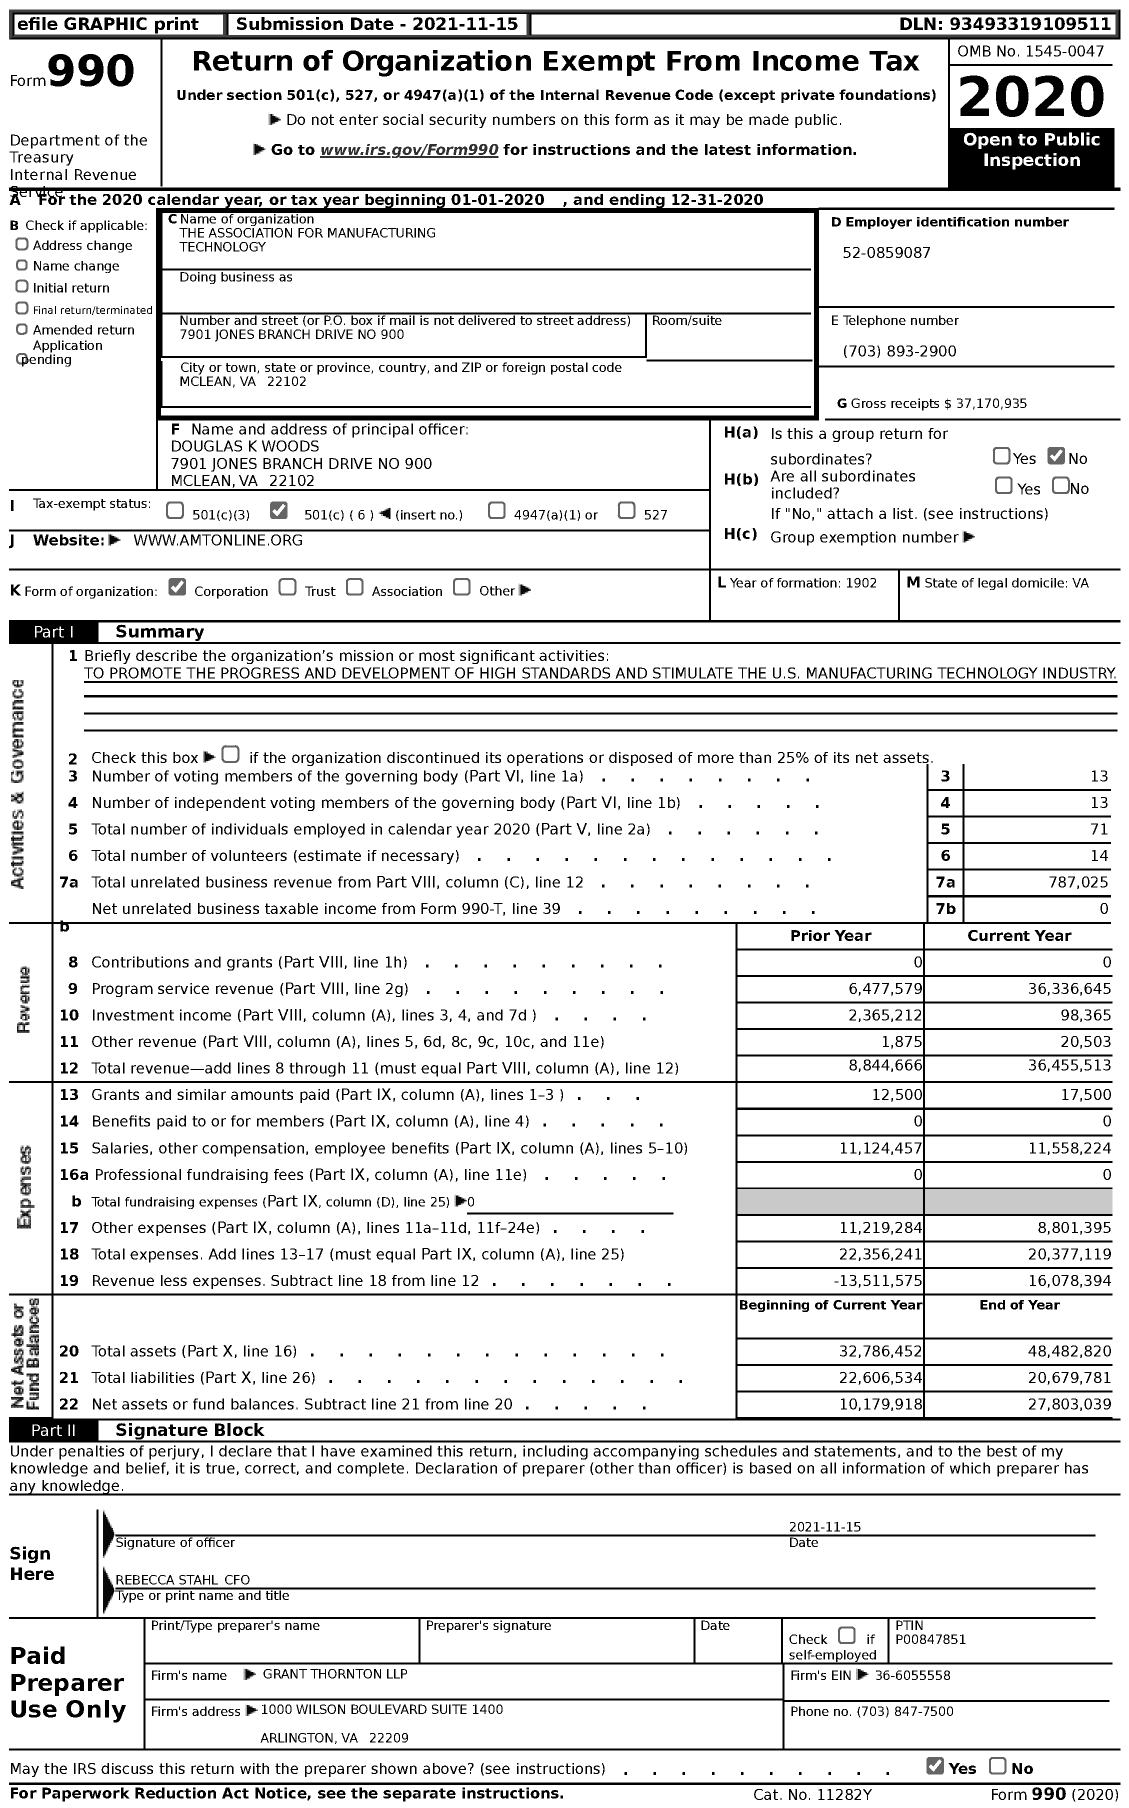 Image of first page of 2020 Form 990 for Amt-The Association for Manufacturing Technology (AMT)